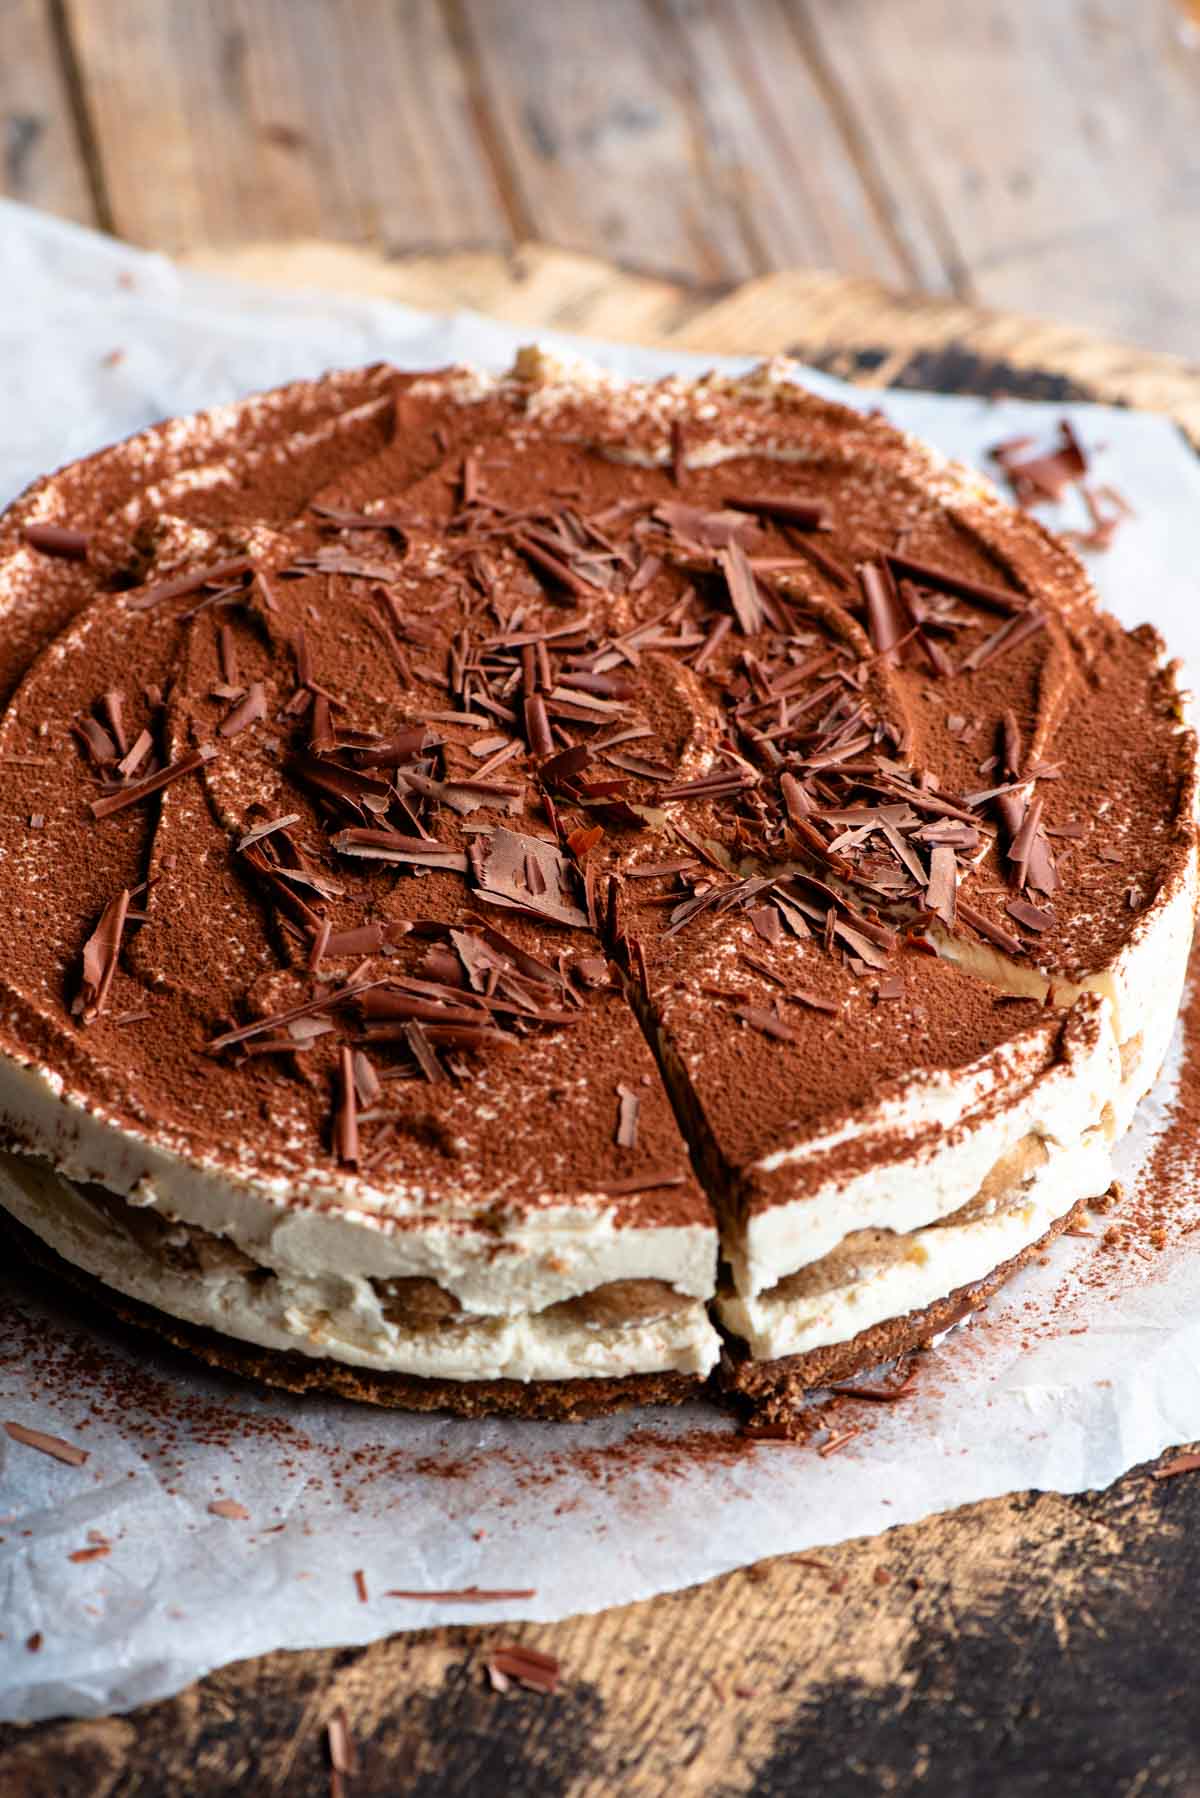 A whole tiramisu cheesecake sitting on a wooden board and parchment paper.